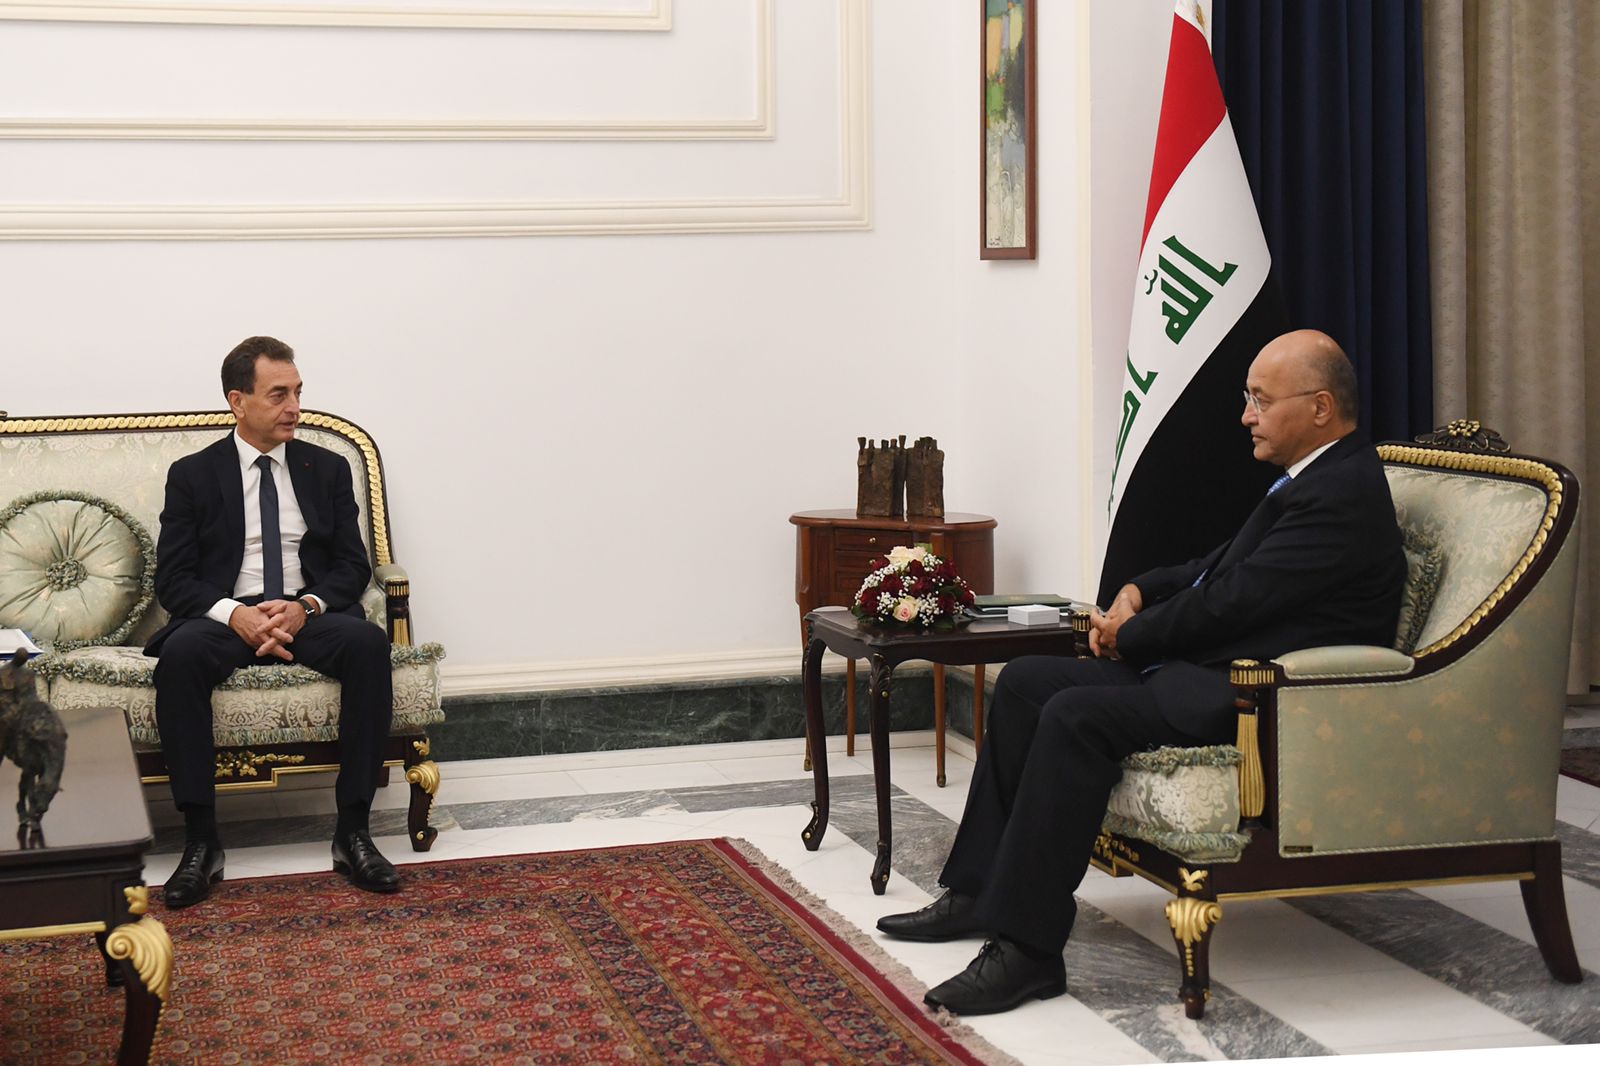 French ambassador to Iraq hands President Salih a letter from Macron